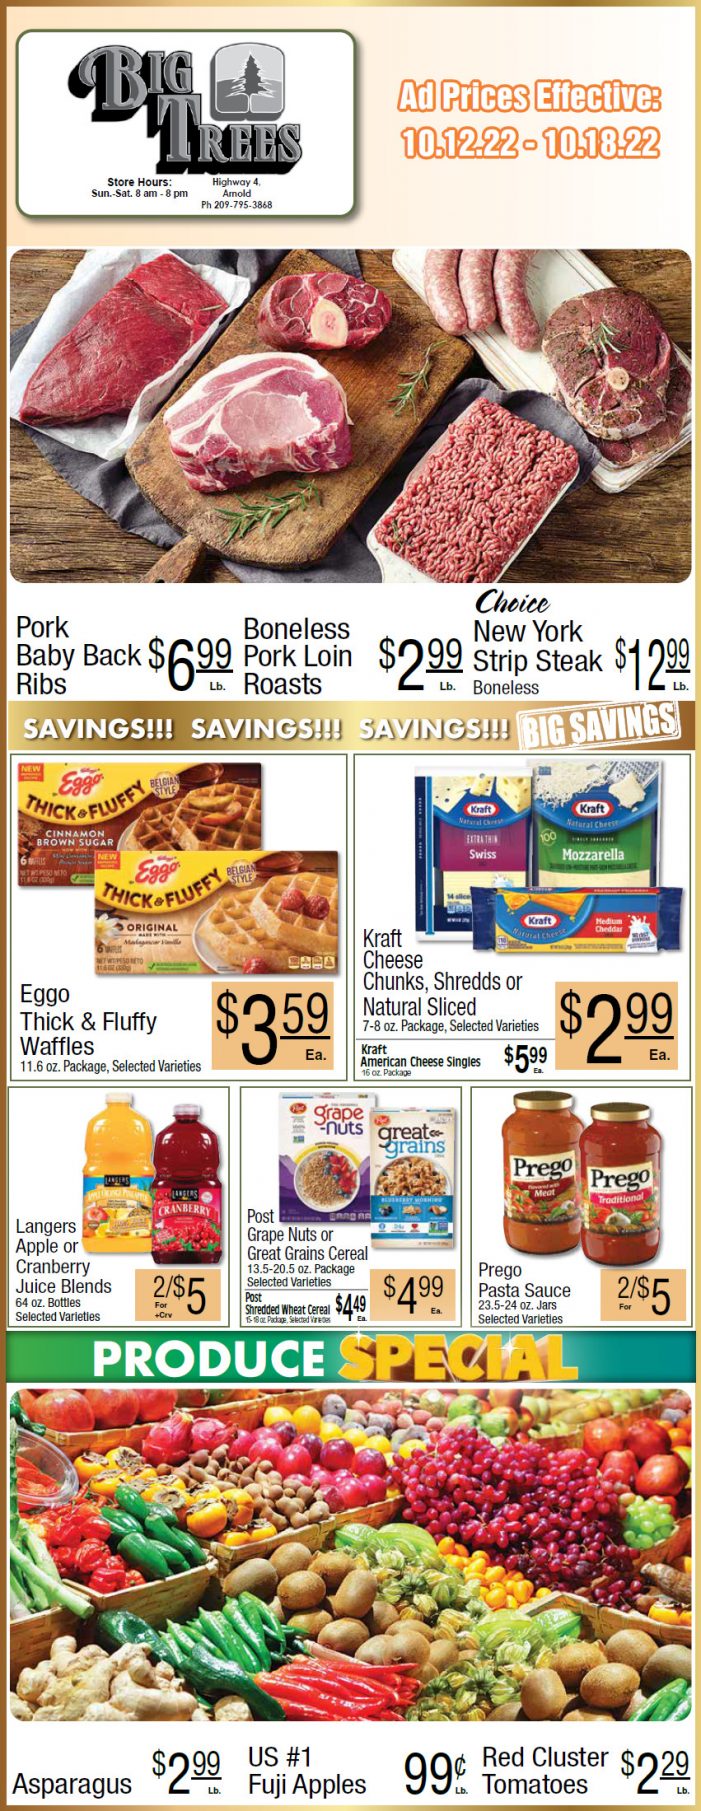 Big Trees Market Weekly Ad & Grocery Specials October 12 – 18!  Shop Local & Save!!